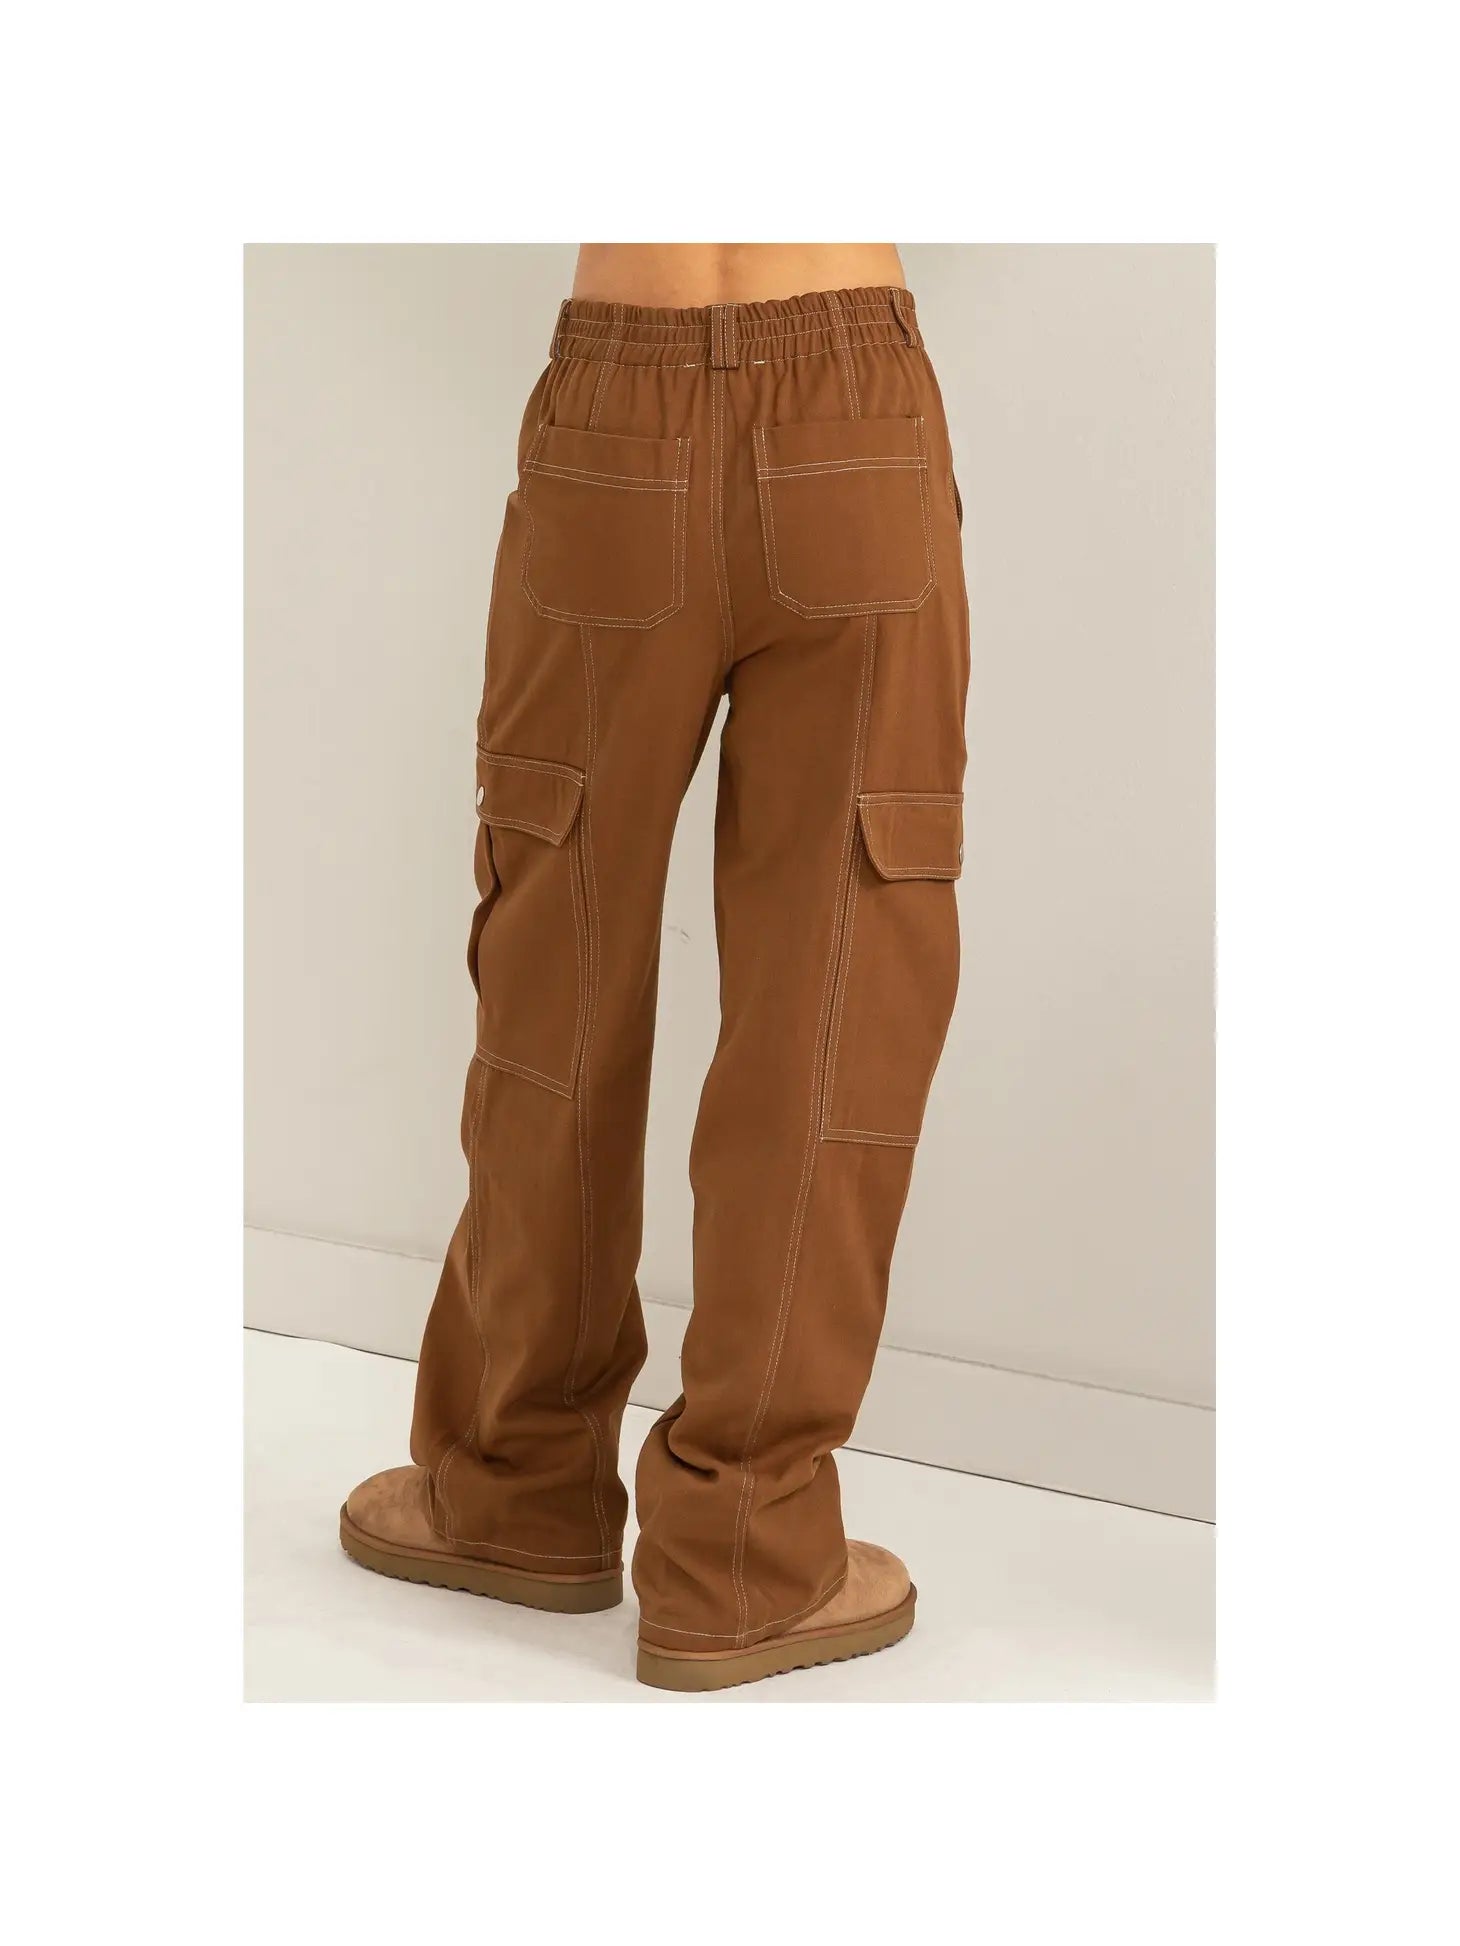 Major Moves Contrast Stitch Twill Cargo Pants